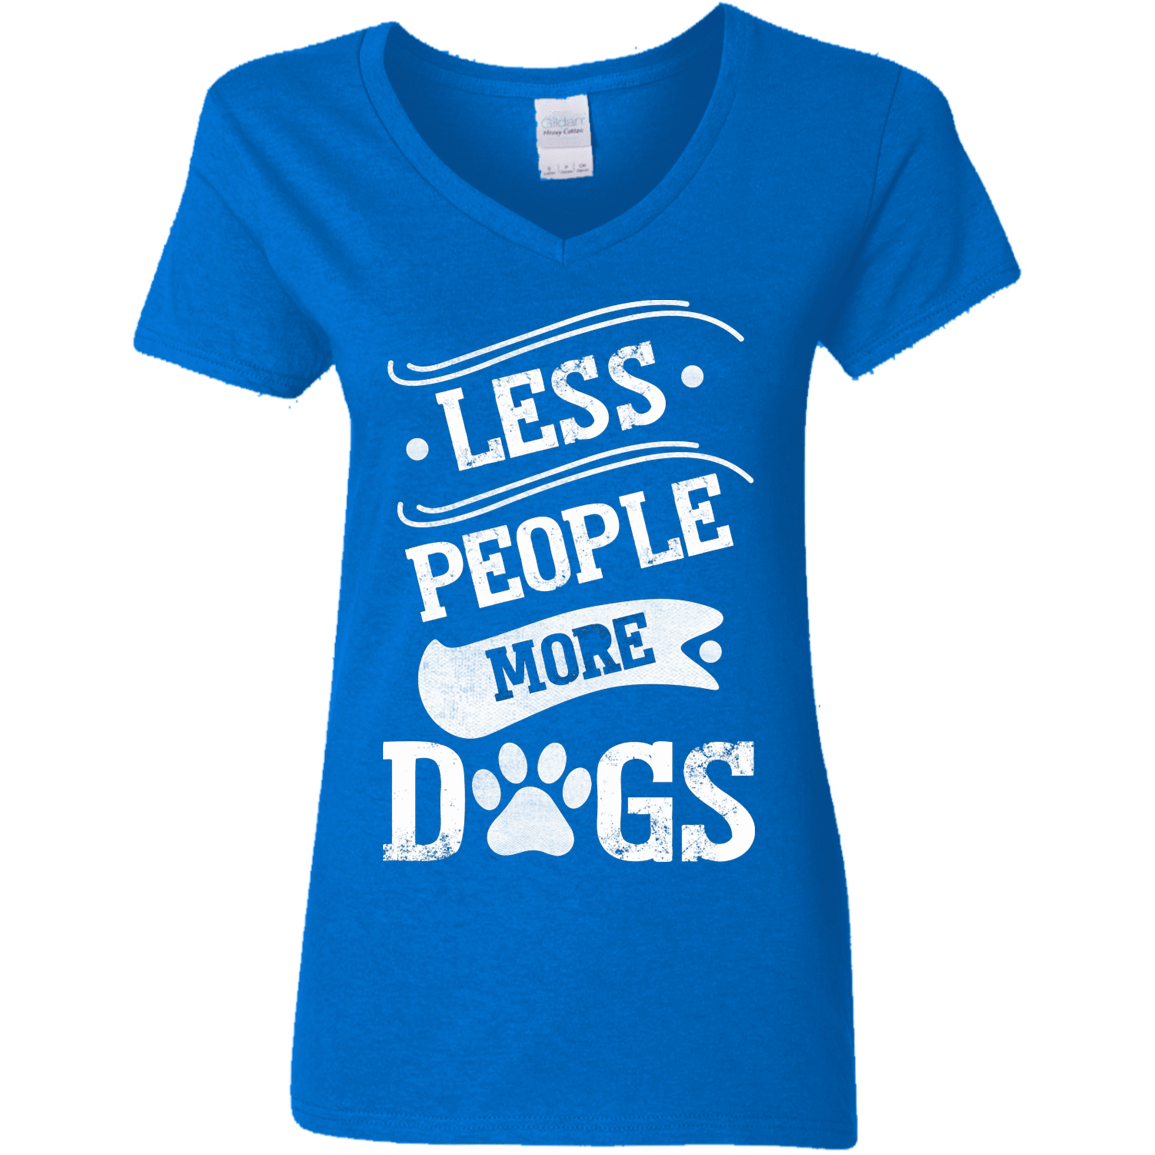 Less People More Dogs - Ladies V Neck.